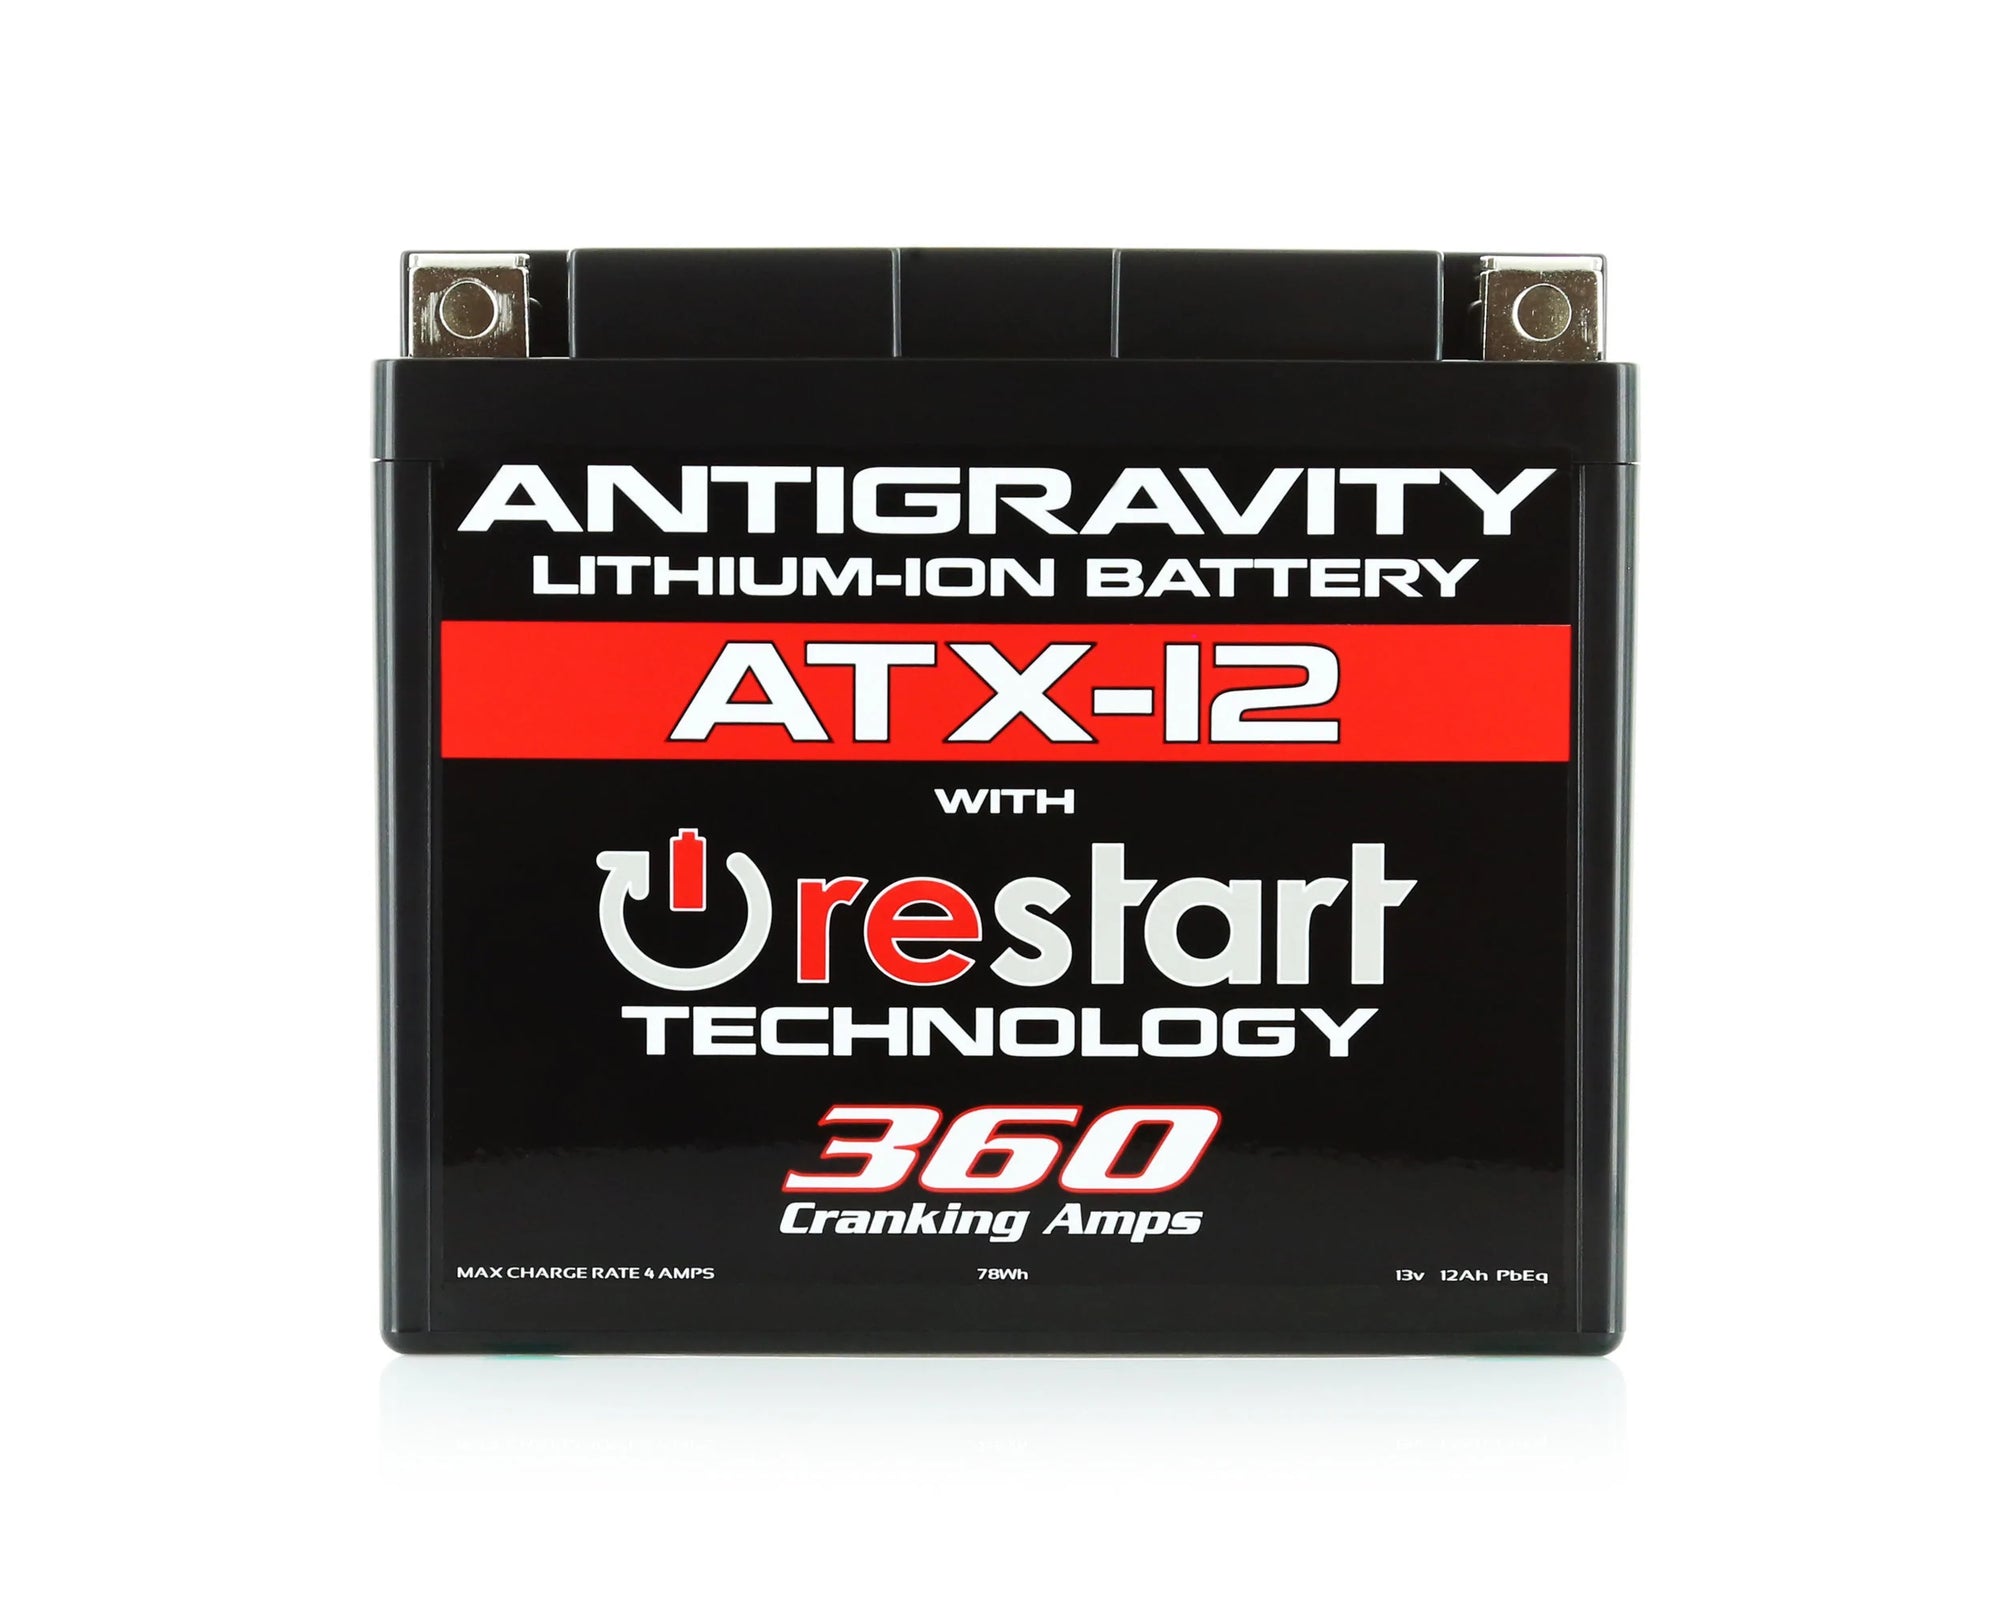 NEW GEAR: ANTIGRAVITY BATTERIES - RE-START LITHIUM-ION BATTERY